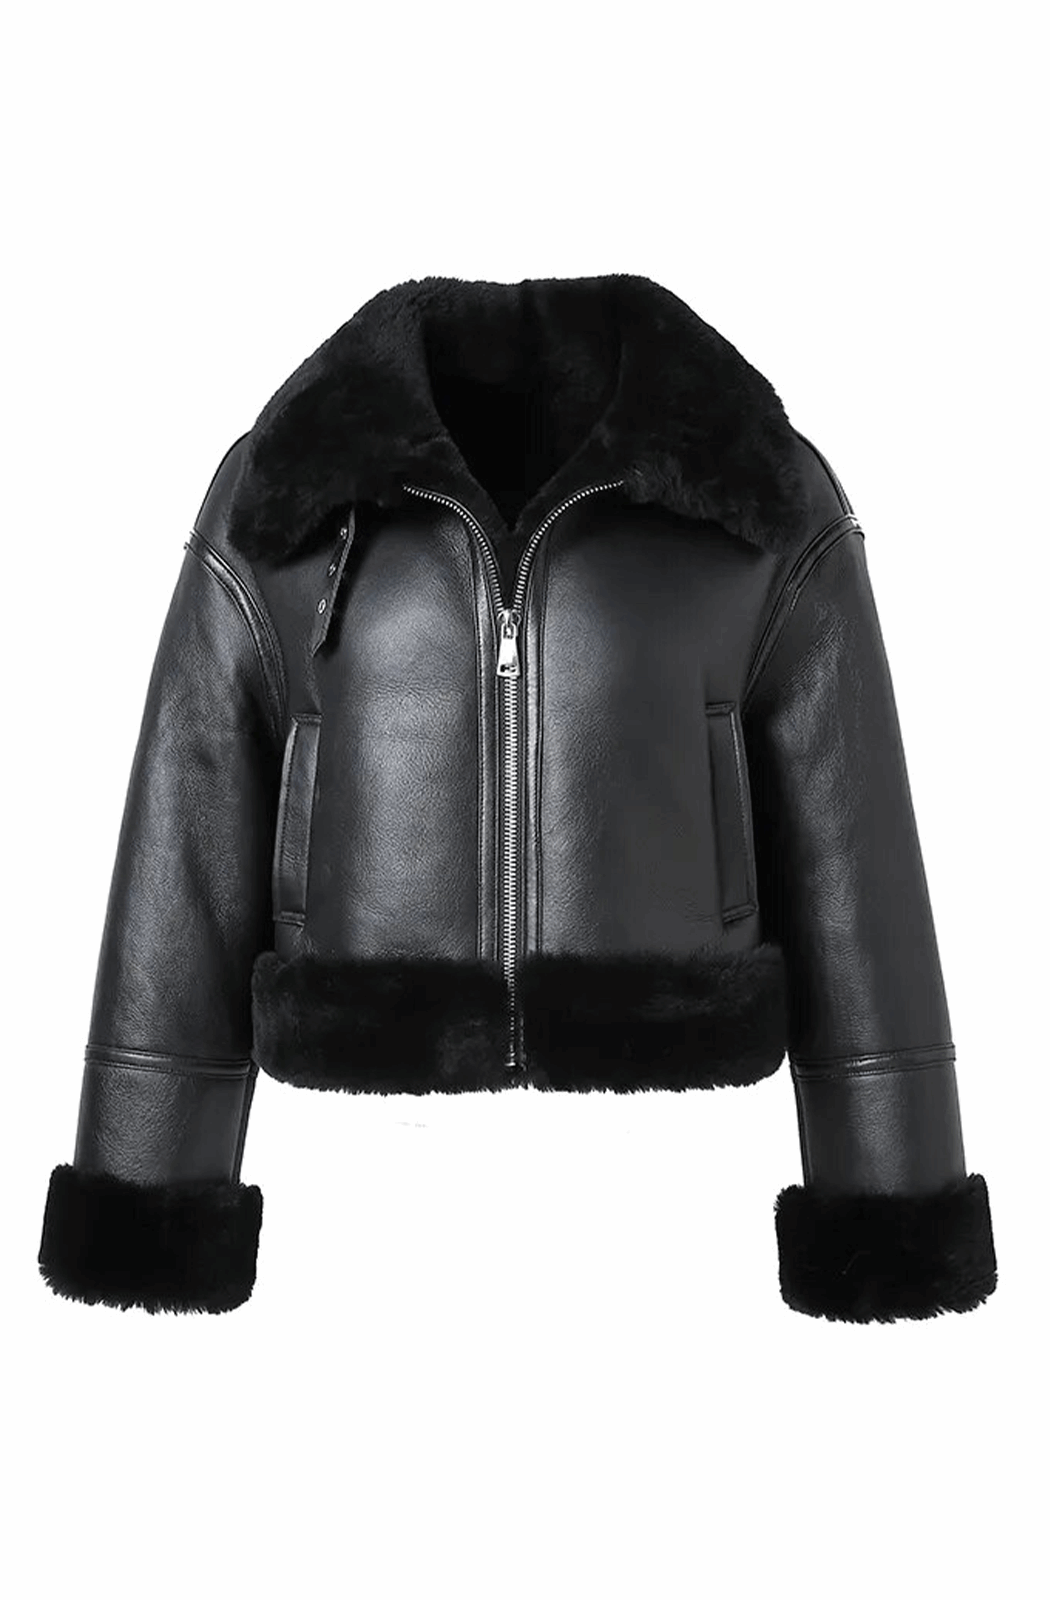 Leather coat with fur collar and cuffs